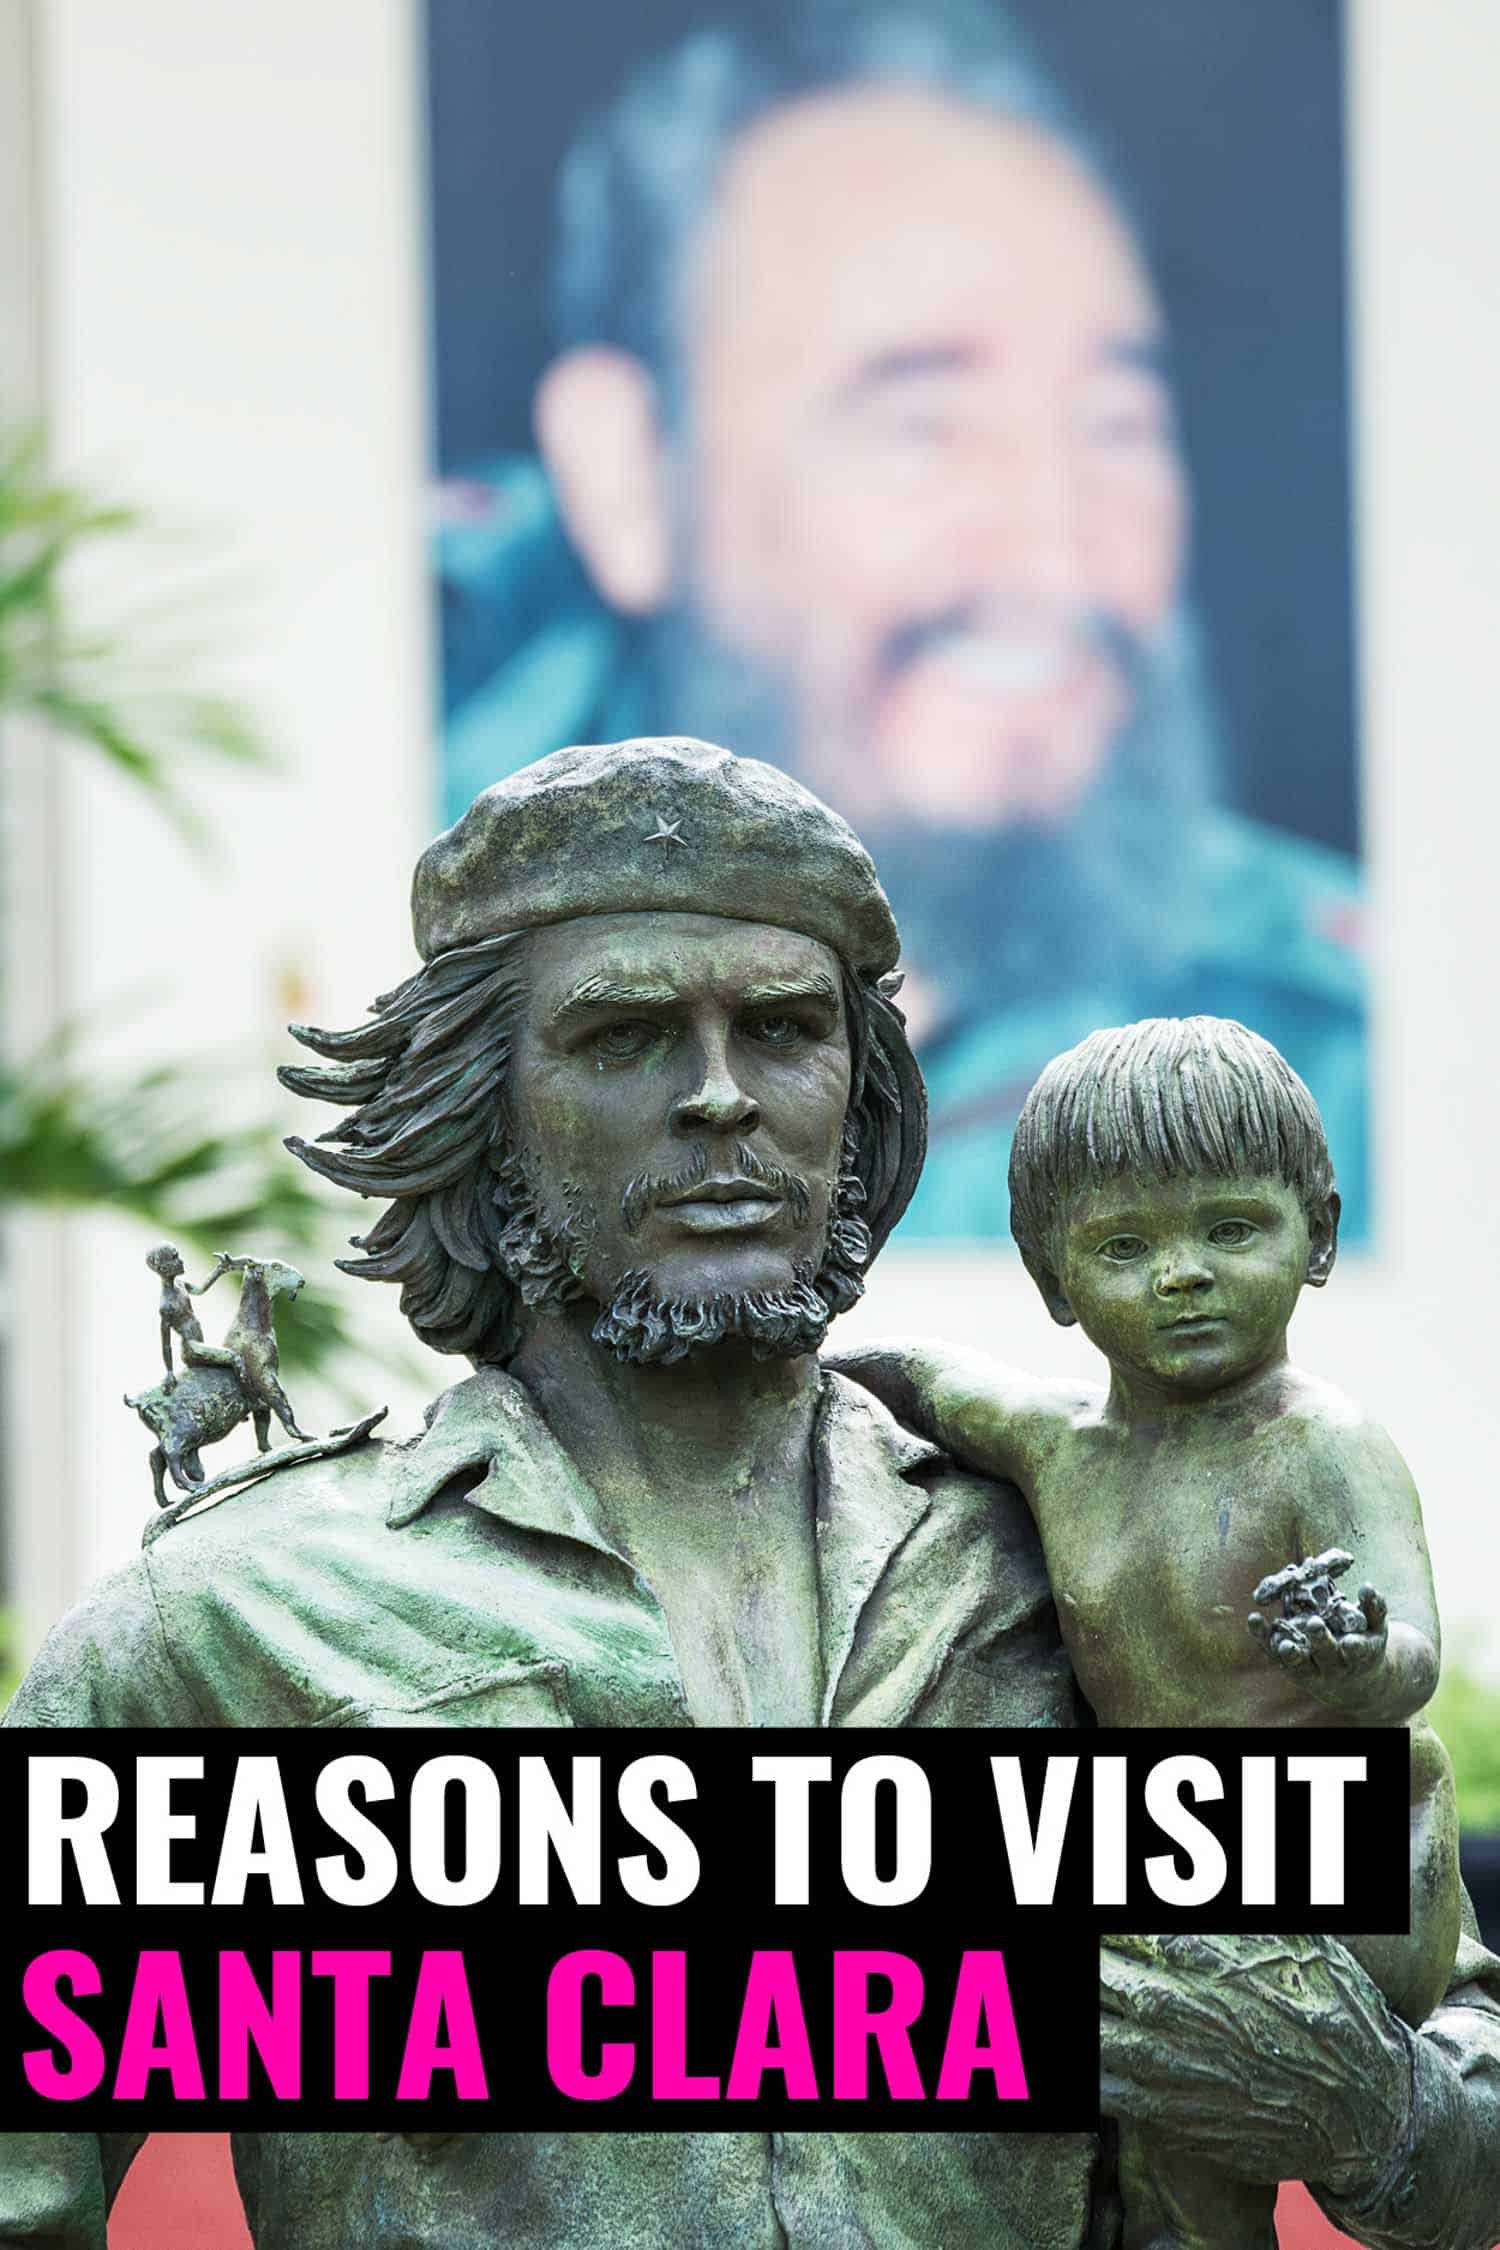 Statue of Che Guevara with a child